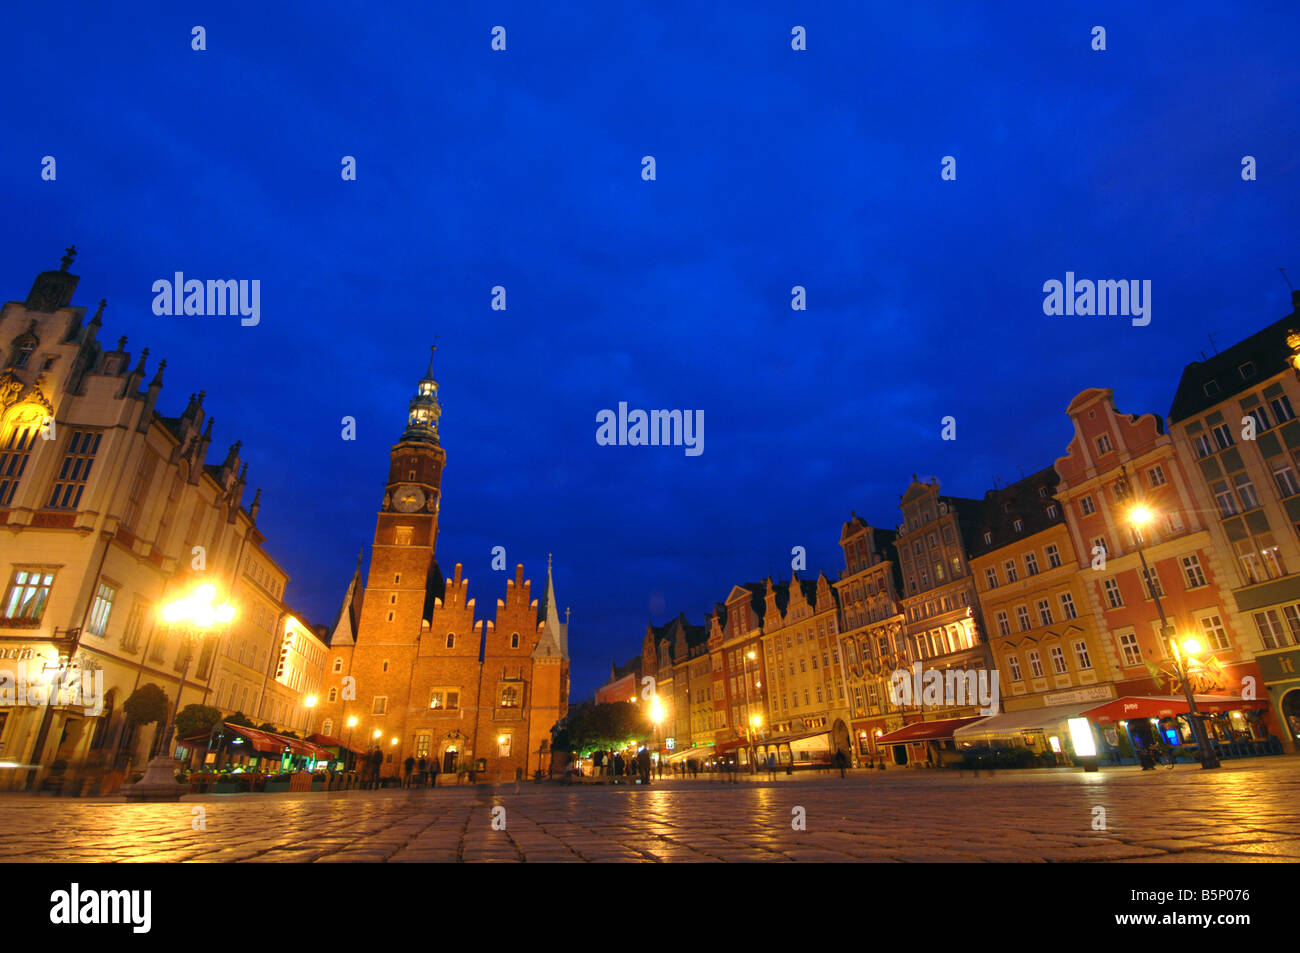 Rynek Square, Wroclaw, Pologne Banque D'Images